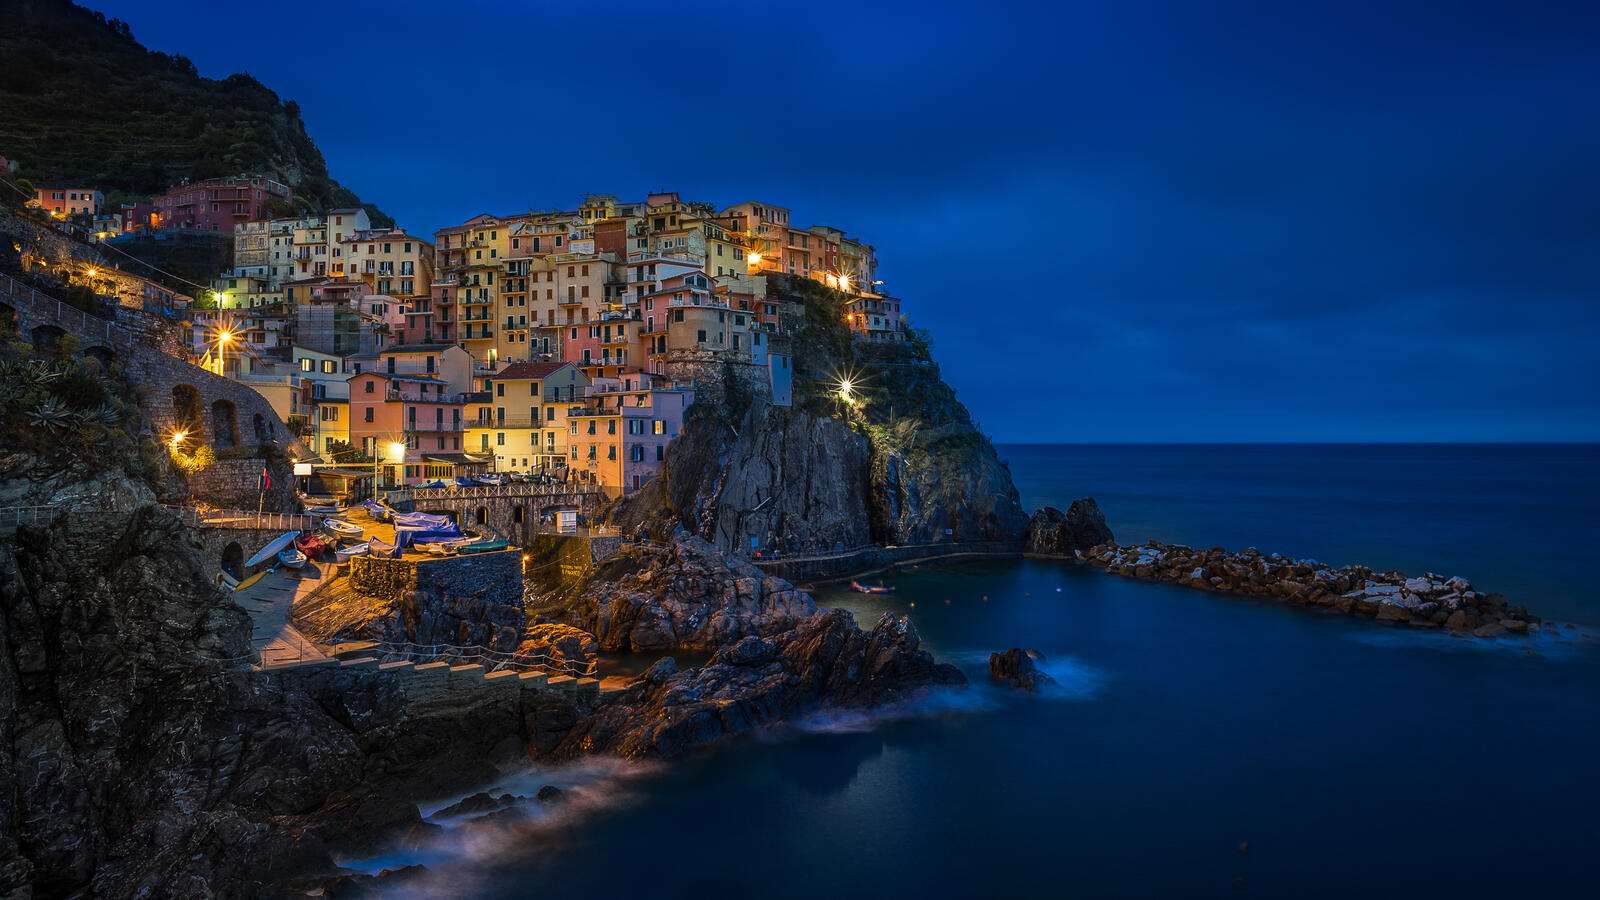 Wallpapers illumination Cinque Terre Italy on the desktop